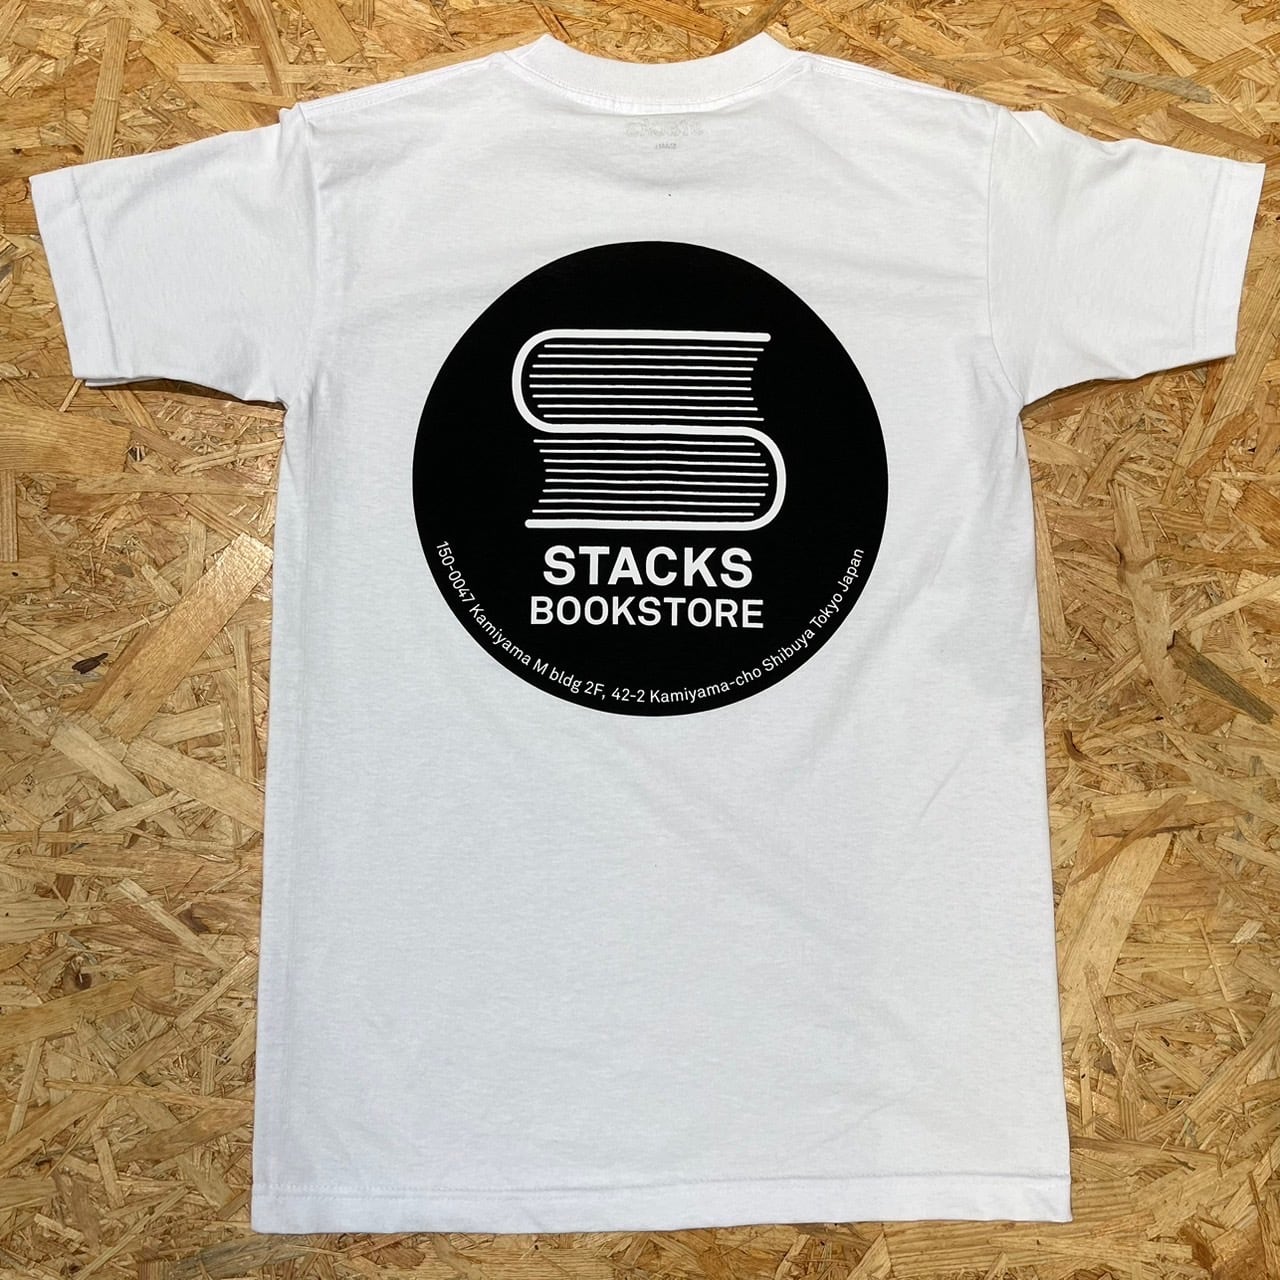 Tシャツ/カットソー(半袖/袖なし)stacks Signboard Tee 2XL 1回使用のみ美品